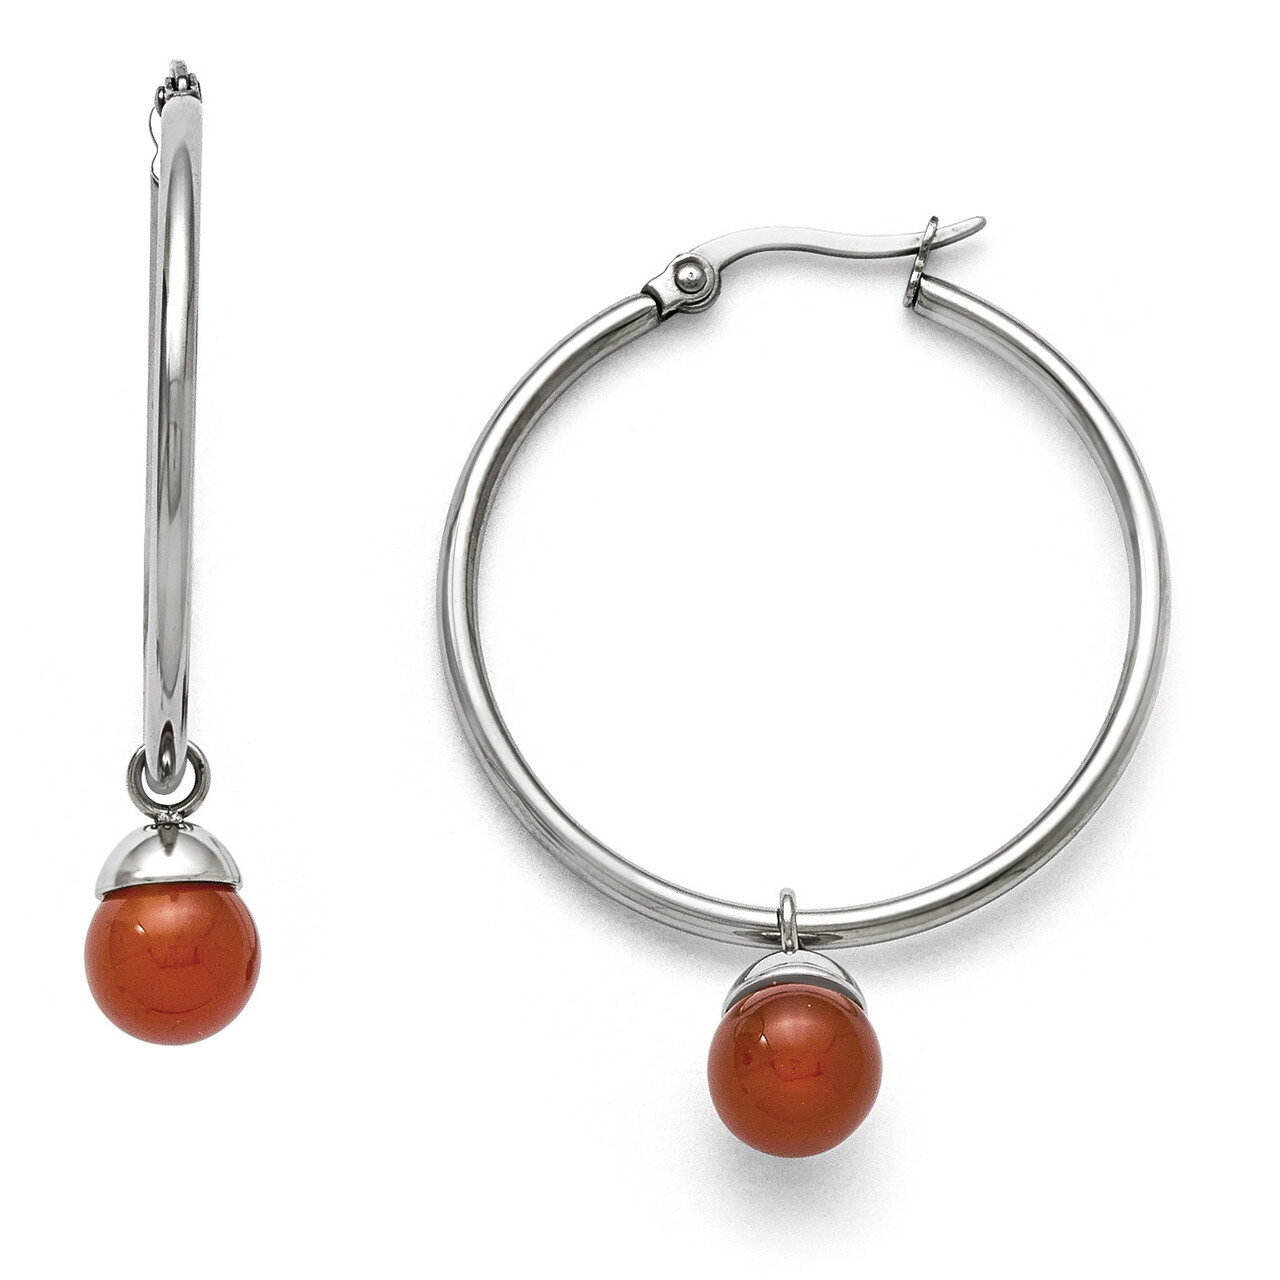 Polished Hinged Hoop with Red Agate Bead Earrings - Stainless Steel SRE801